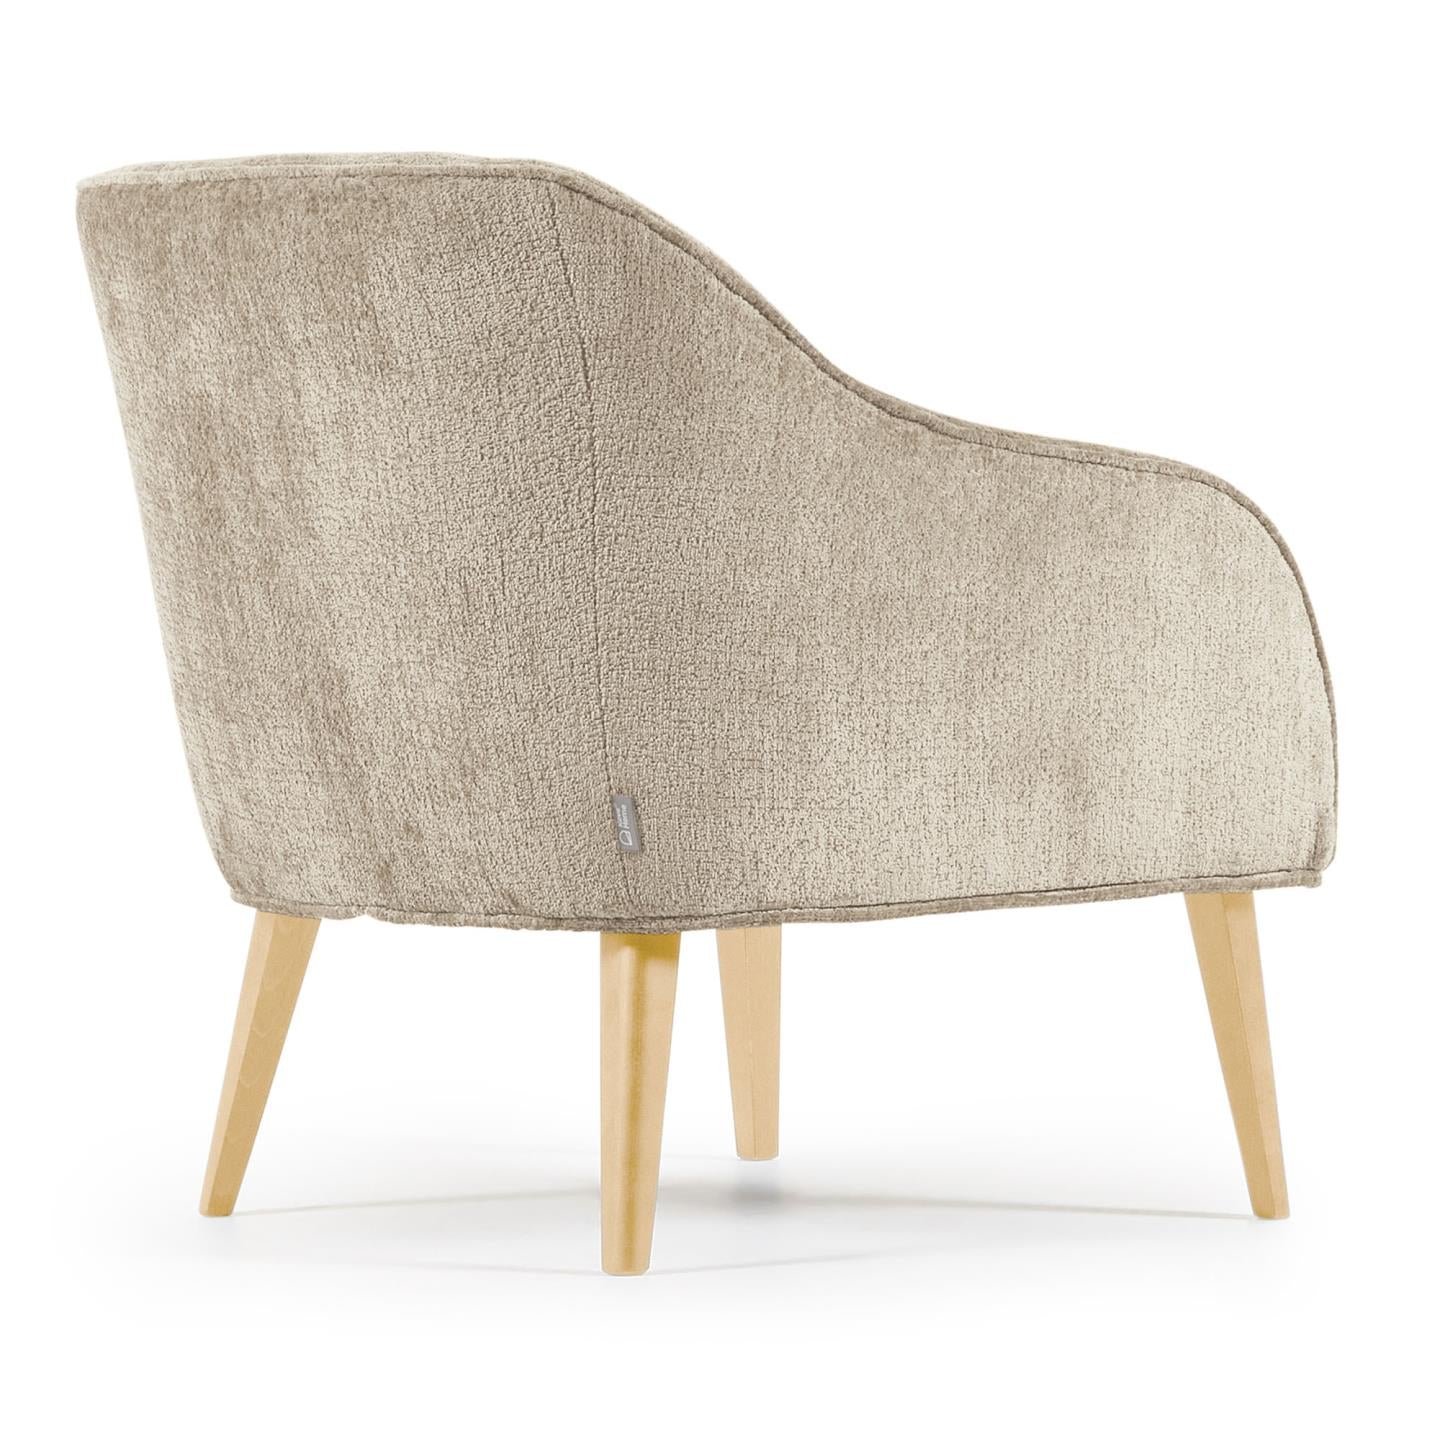 Bobly armchair in beige chenille with wooden legs with natural finish